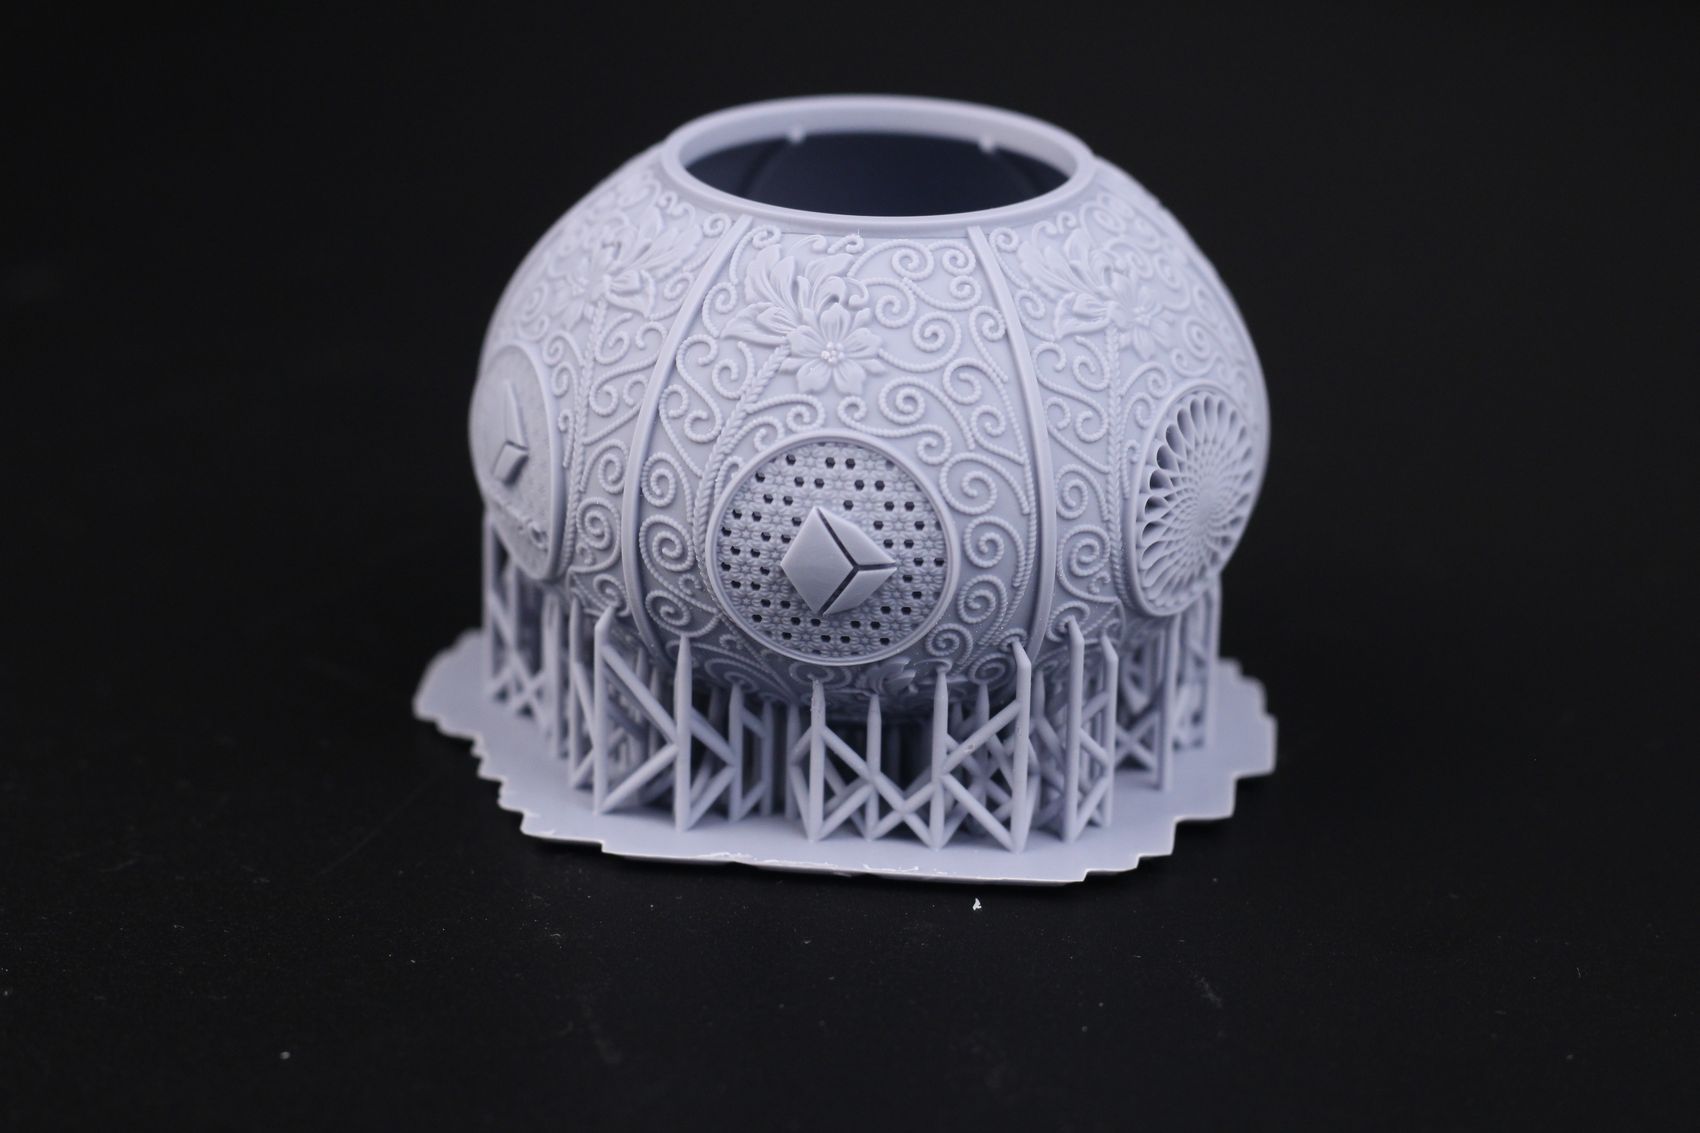 Anycubic DLP Test Model on Photon D25 | Anycubic Photon D2 Review: DLP Resin 3D Printer